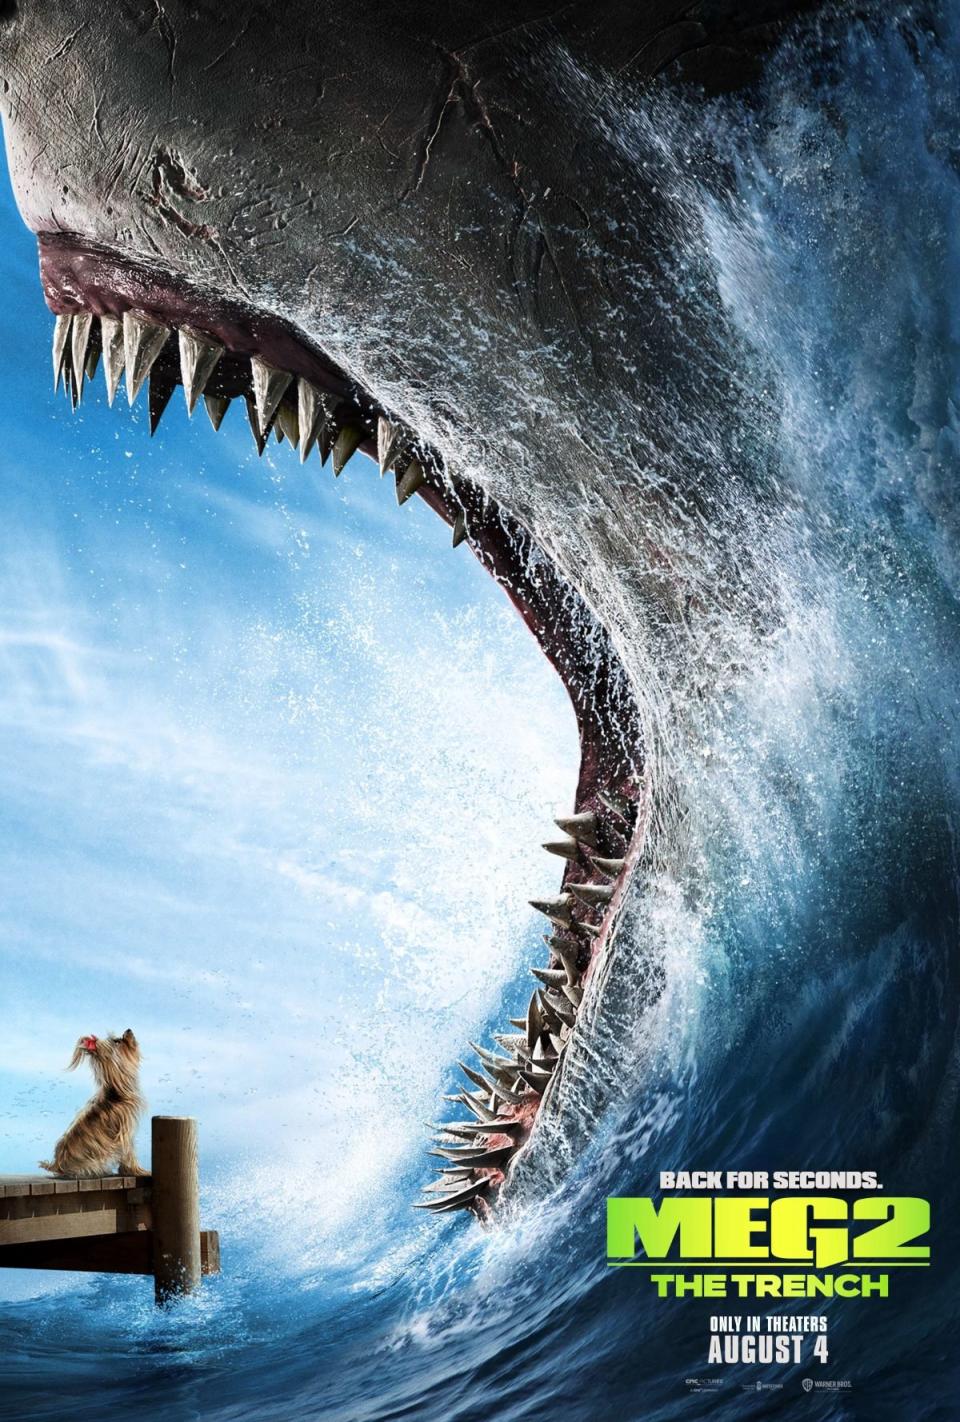 The Meg opens its massive jaws to eat a small dog on a dock in the poster for Meg 2: The Trench